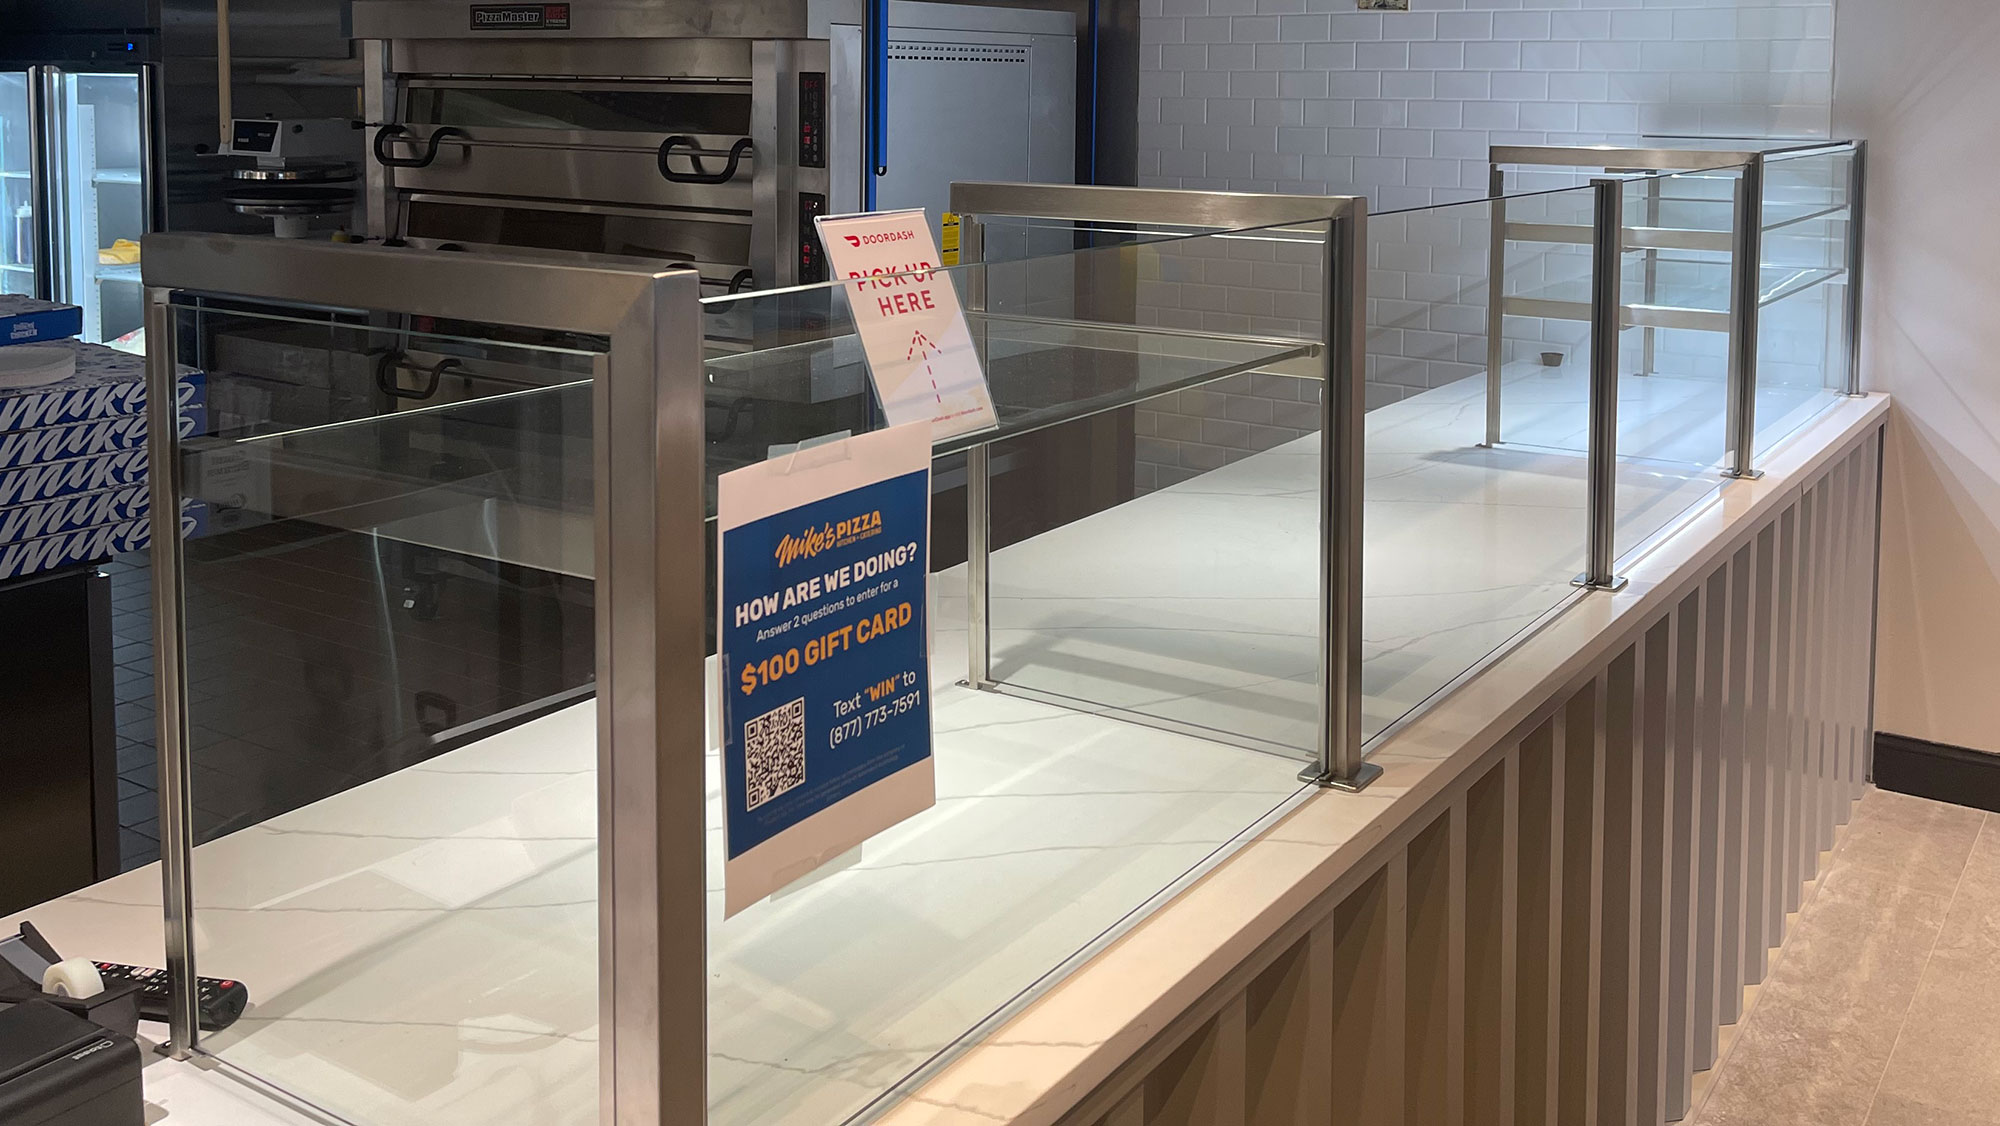 Satin stainless steel food shields with LED lights | Mike’s Pizza Kitchen - Parlin, NJ